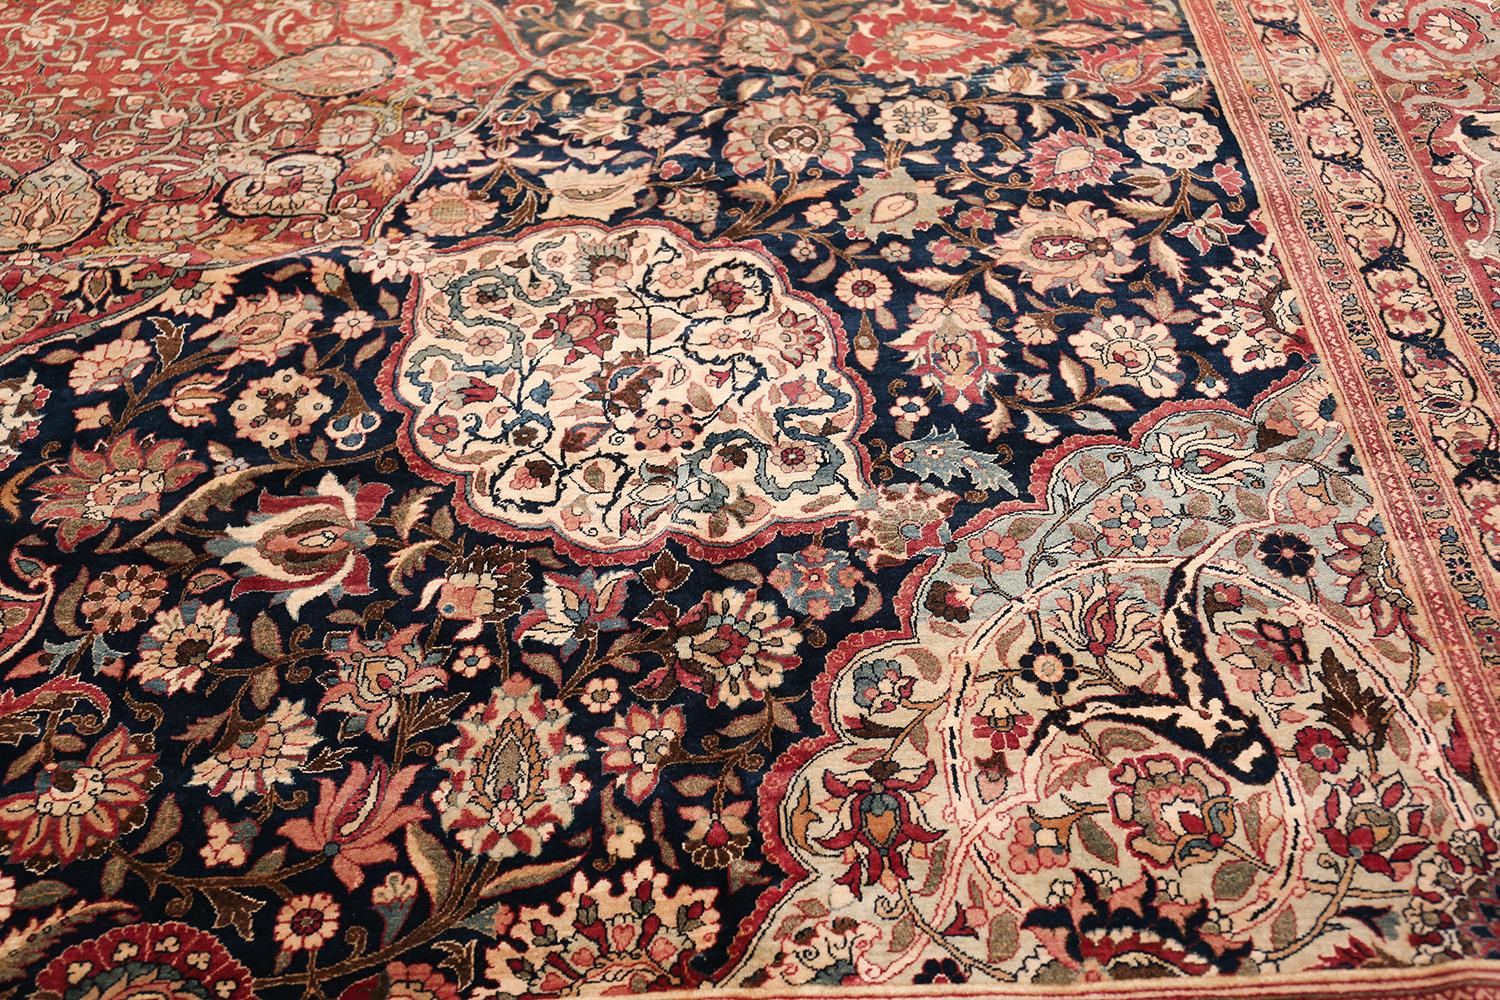 Oversized Antique Tehran Persian Carpet. Size: 14 ft 3 in x 22 ft 3 in 6